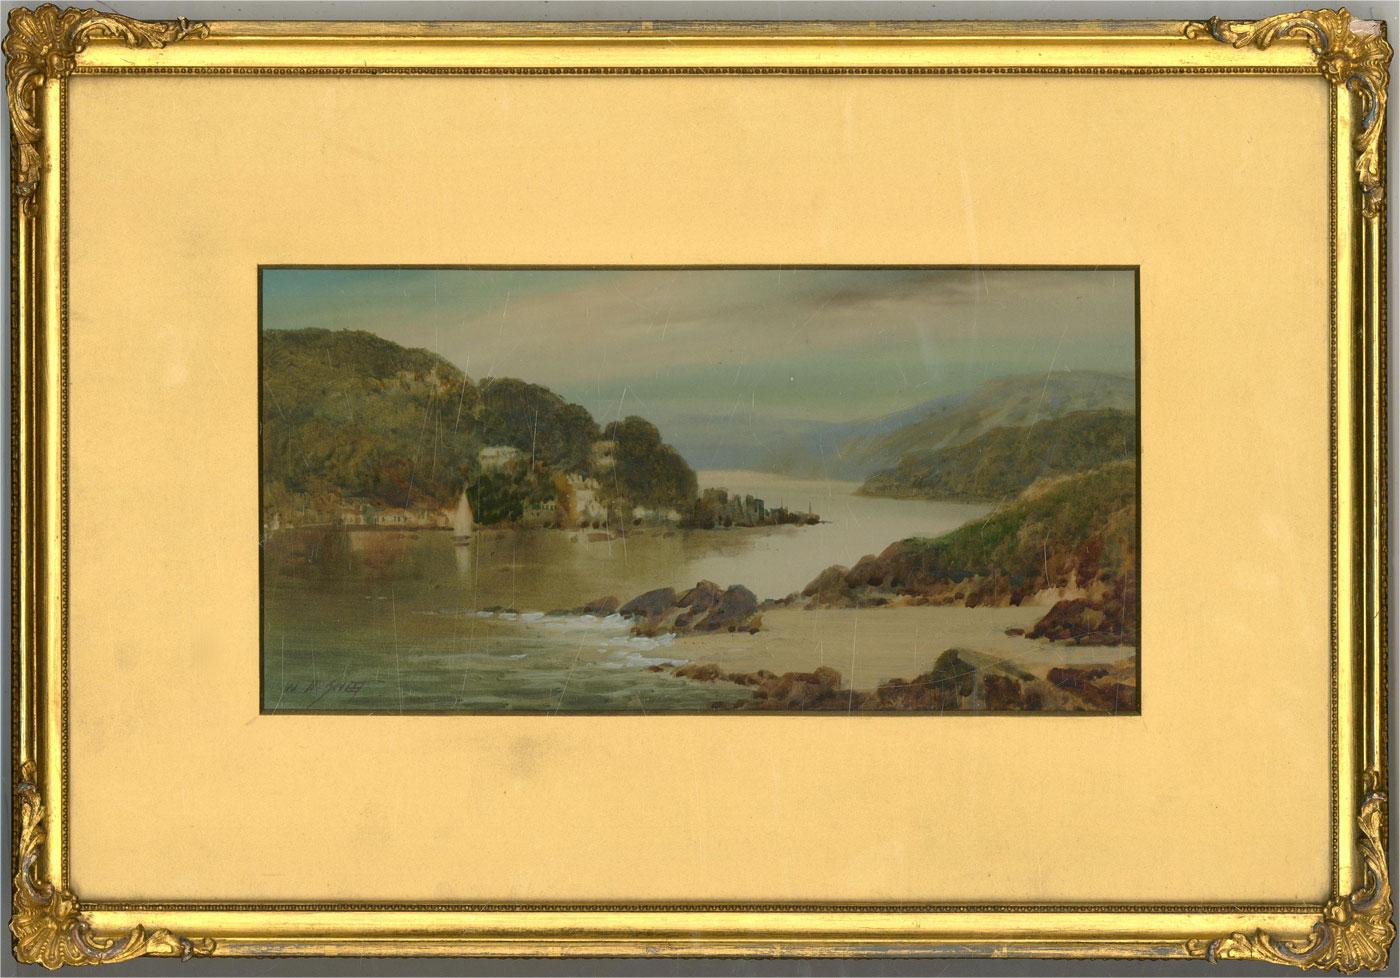 A fine early 20th century watercolour painting with gouache details by the artist William Henry Sweet. The scene depicts a river scene with a small town. Signed to the lower left-hand corner. Listings by William Henry Sweet often appear as Walter